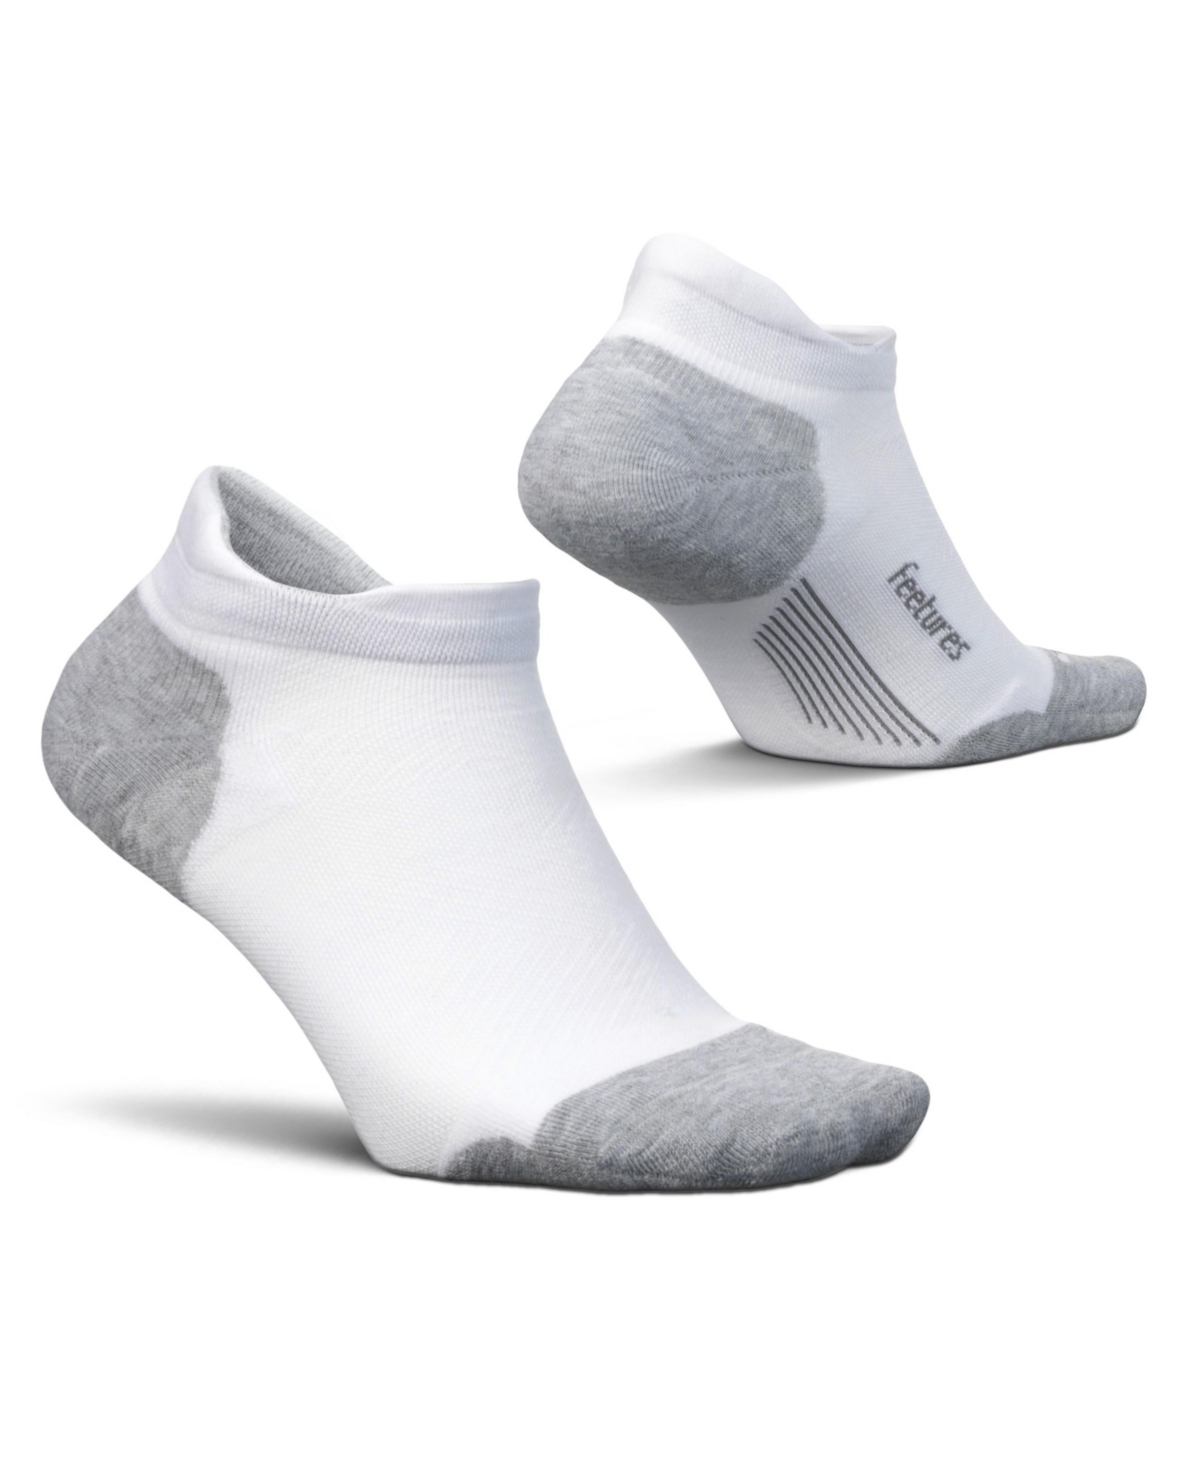 Men's Elite Max Cushion No Show Tab Ankle Socks - Sport Sock with Targeted Compression - New White, M (1 Pair) - White